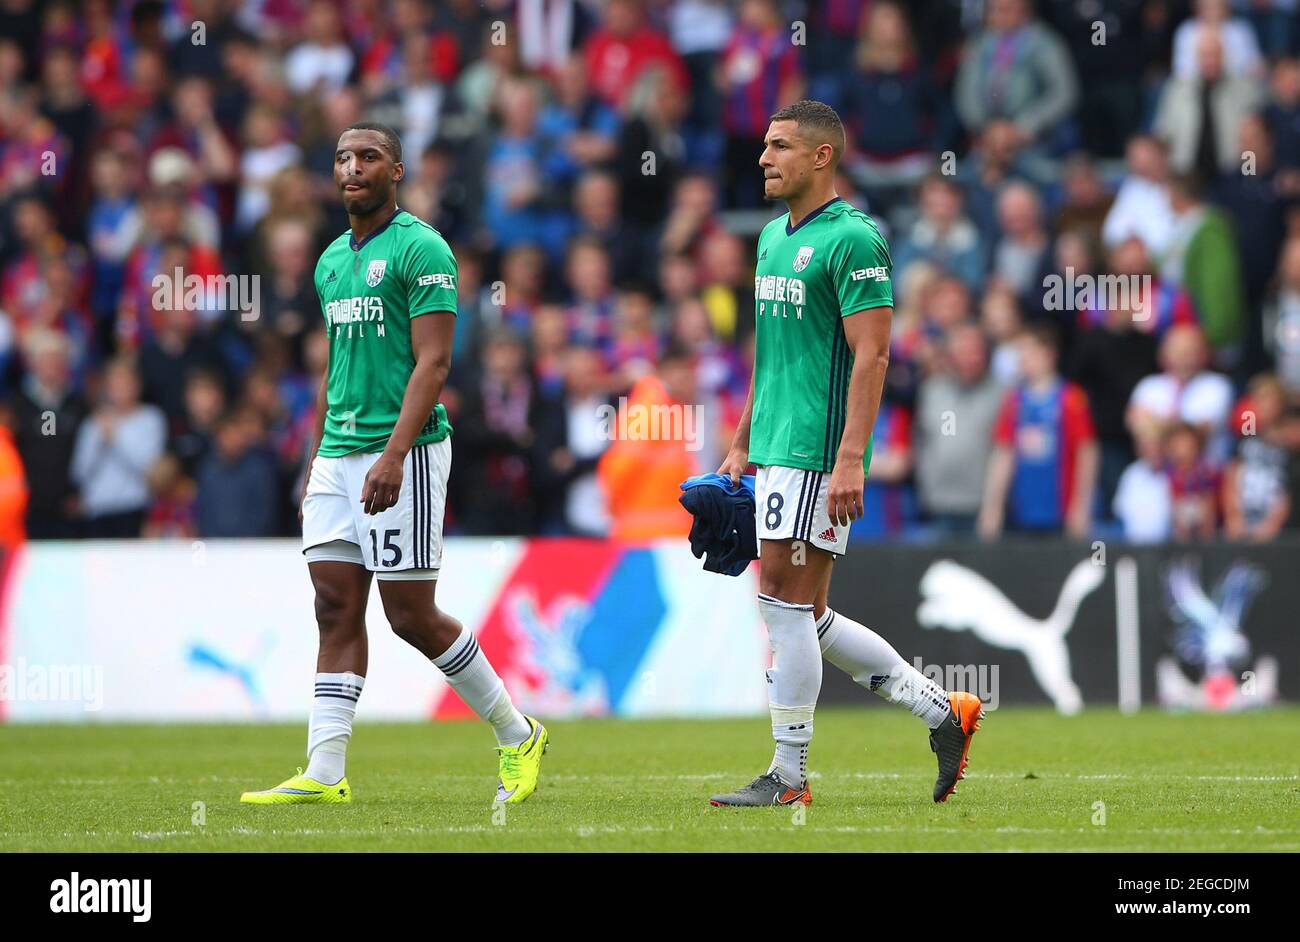 Soccer Football - Premier League - Crystal Palace vs West Bromwich Albion - Selhurst Park, London, Britain - May 13, 2018   West Bromwich Albion's Daniel Sturridge and Jake Livermore look dejected after the match   REUTERS/Hannah McKay    EDITORIAL USE ONLY. No use with unauthorized audio, video, data, fixture lists, club/league logos or 'live' services. Online in-match use limited to 75 images, no video emulation. No use in betting, games or single club/league/player publications.  Please contact your account representative for further details. Stock Photo